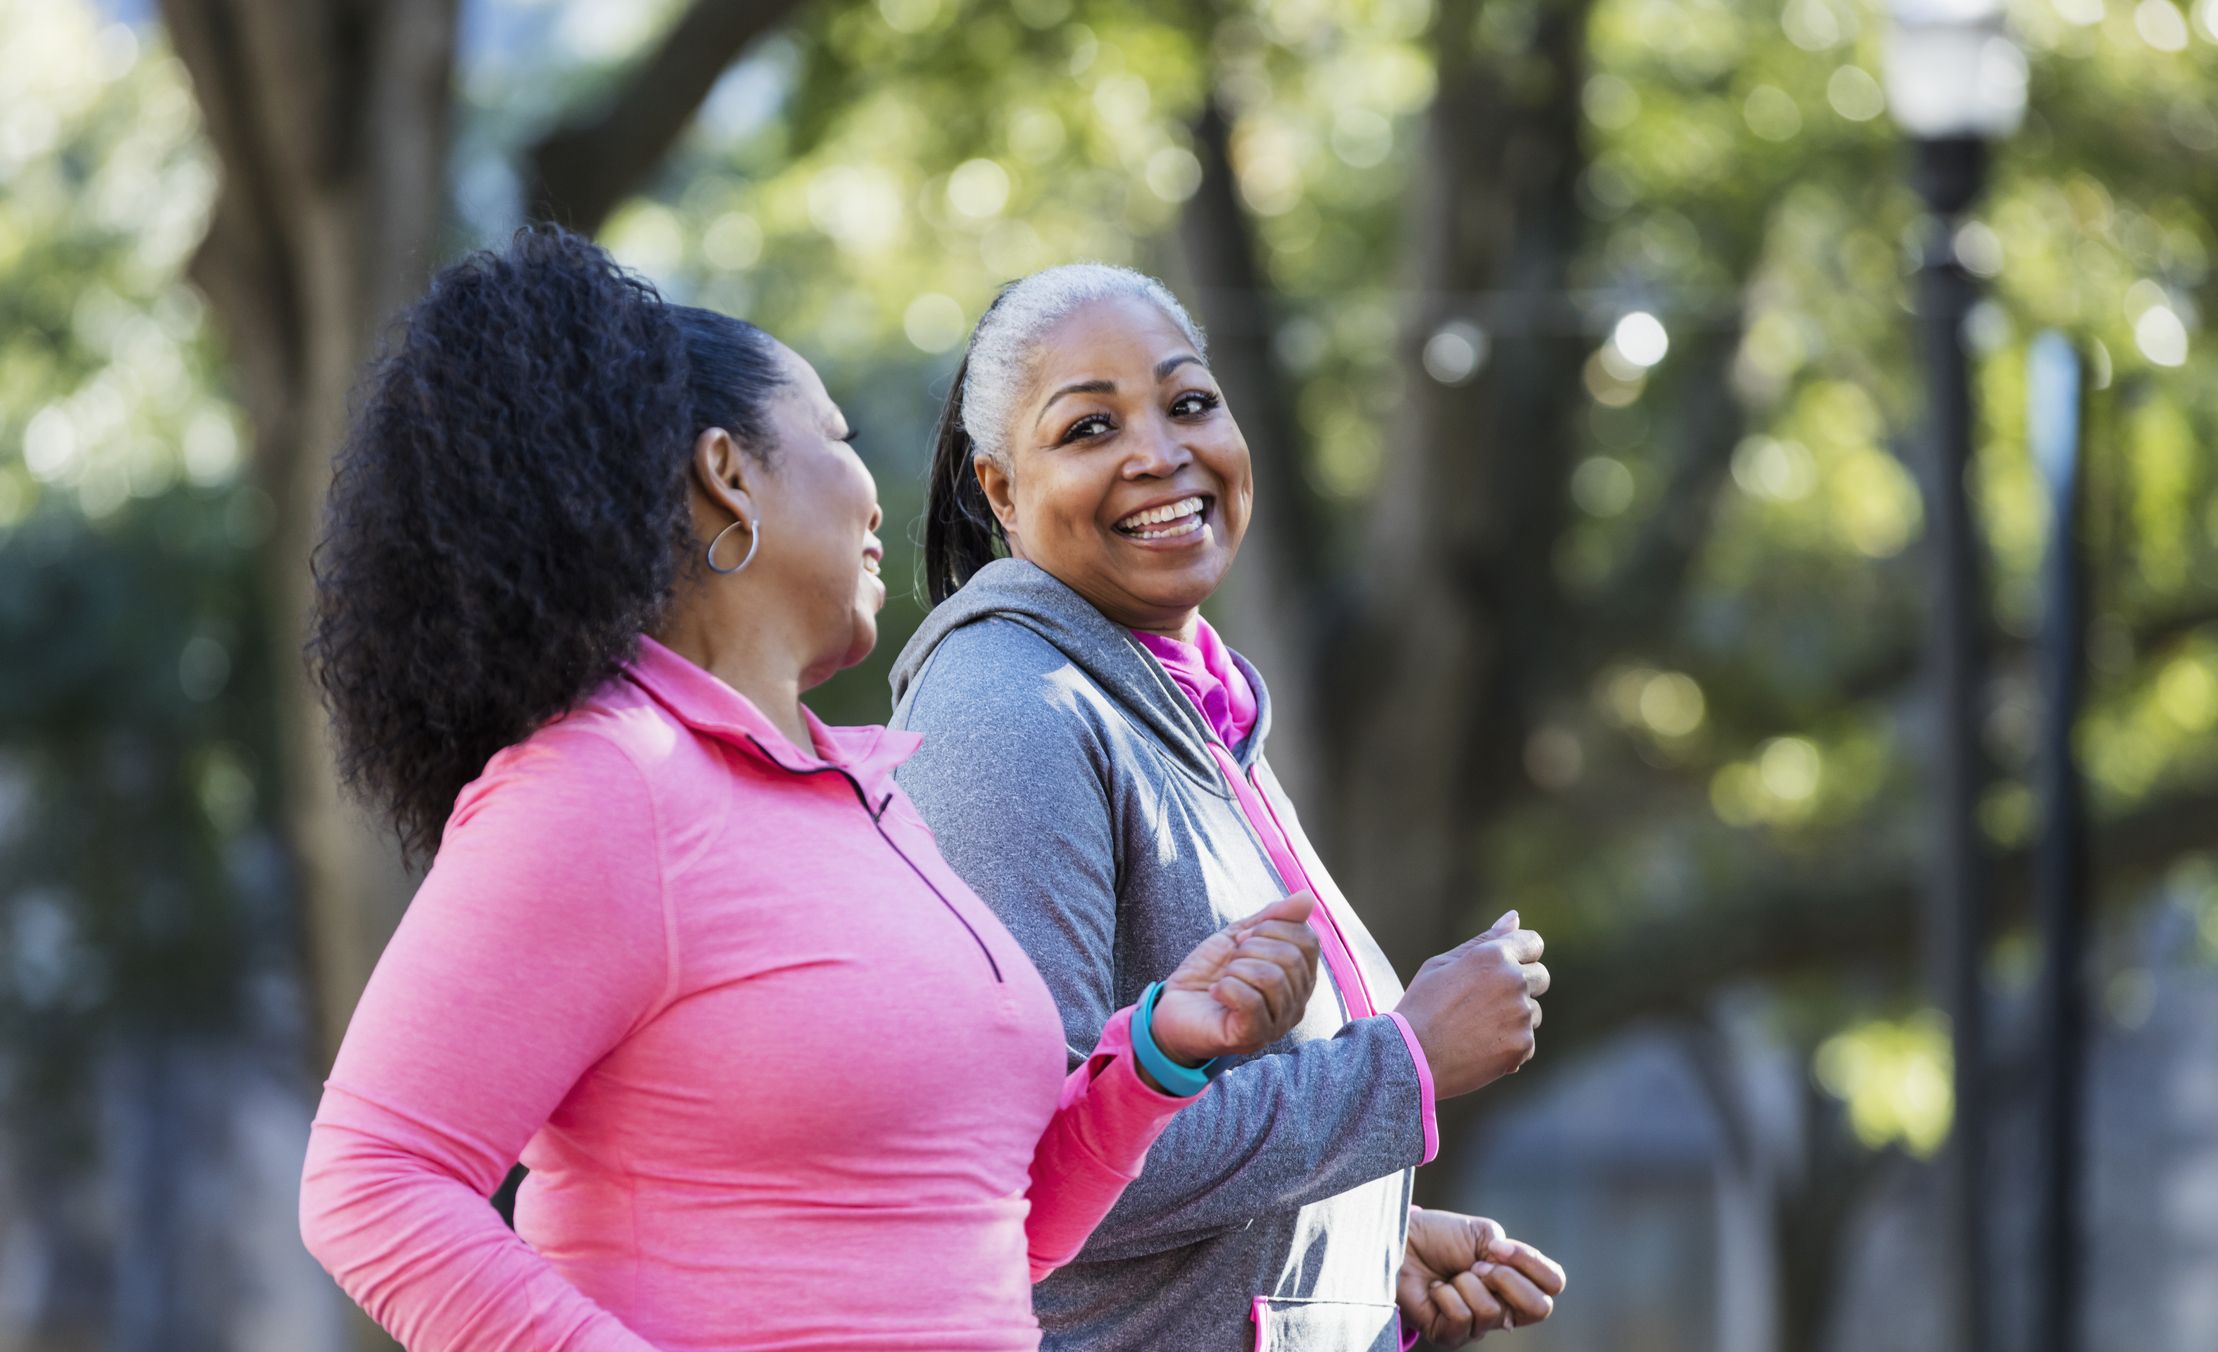 Walking: Does It Help You Lose Weight? – Cleveland Clinic